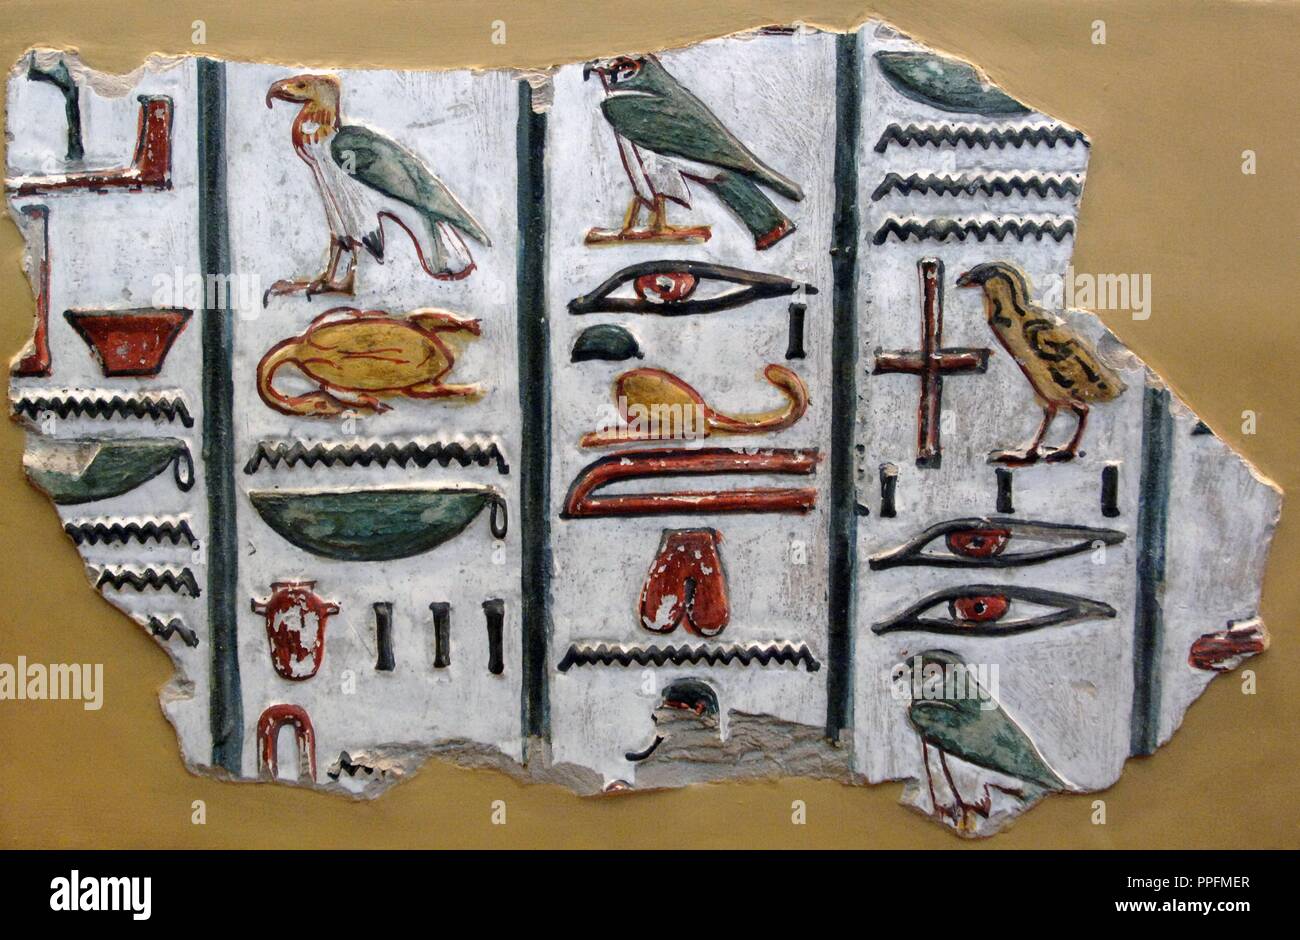 Hieroglyphic writing. Fragment of the wall decoration of the tomb of Seti I (c.1294-1279 BC), 19th Dynasty. New Kingdom. Polychrome inscription with the text 'Litany of the Eye of Horus'. From the tomb 17 of the Valley of the Kings. British Museum. London. United Kingdom. Stock Photo